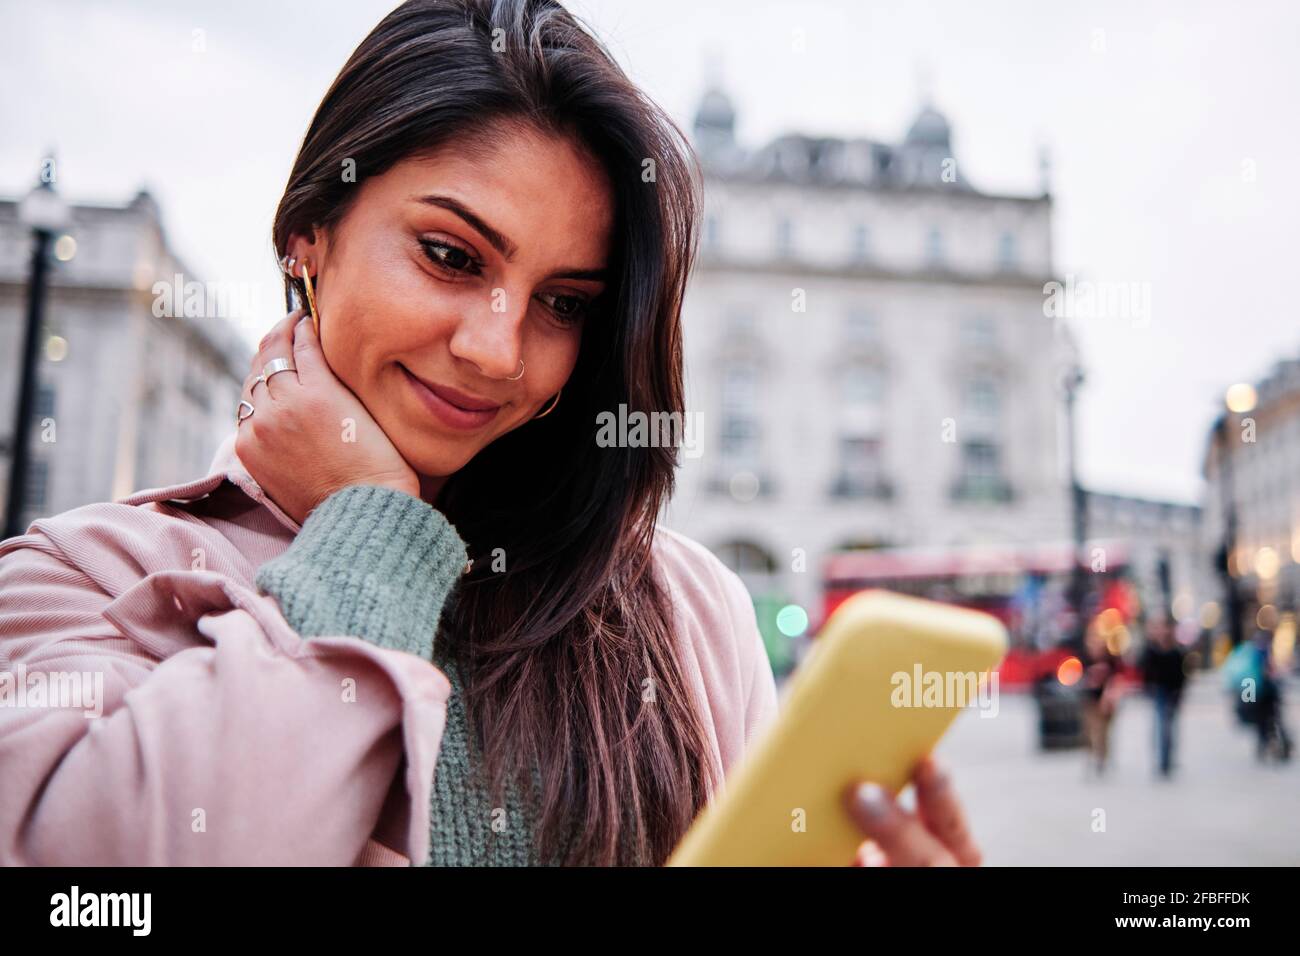 Smiling woman looking at mobile phone in city Stock Photo